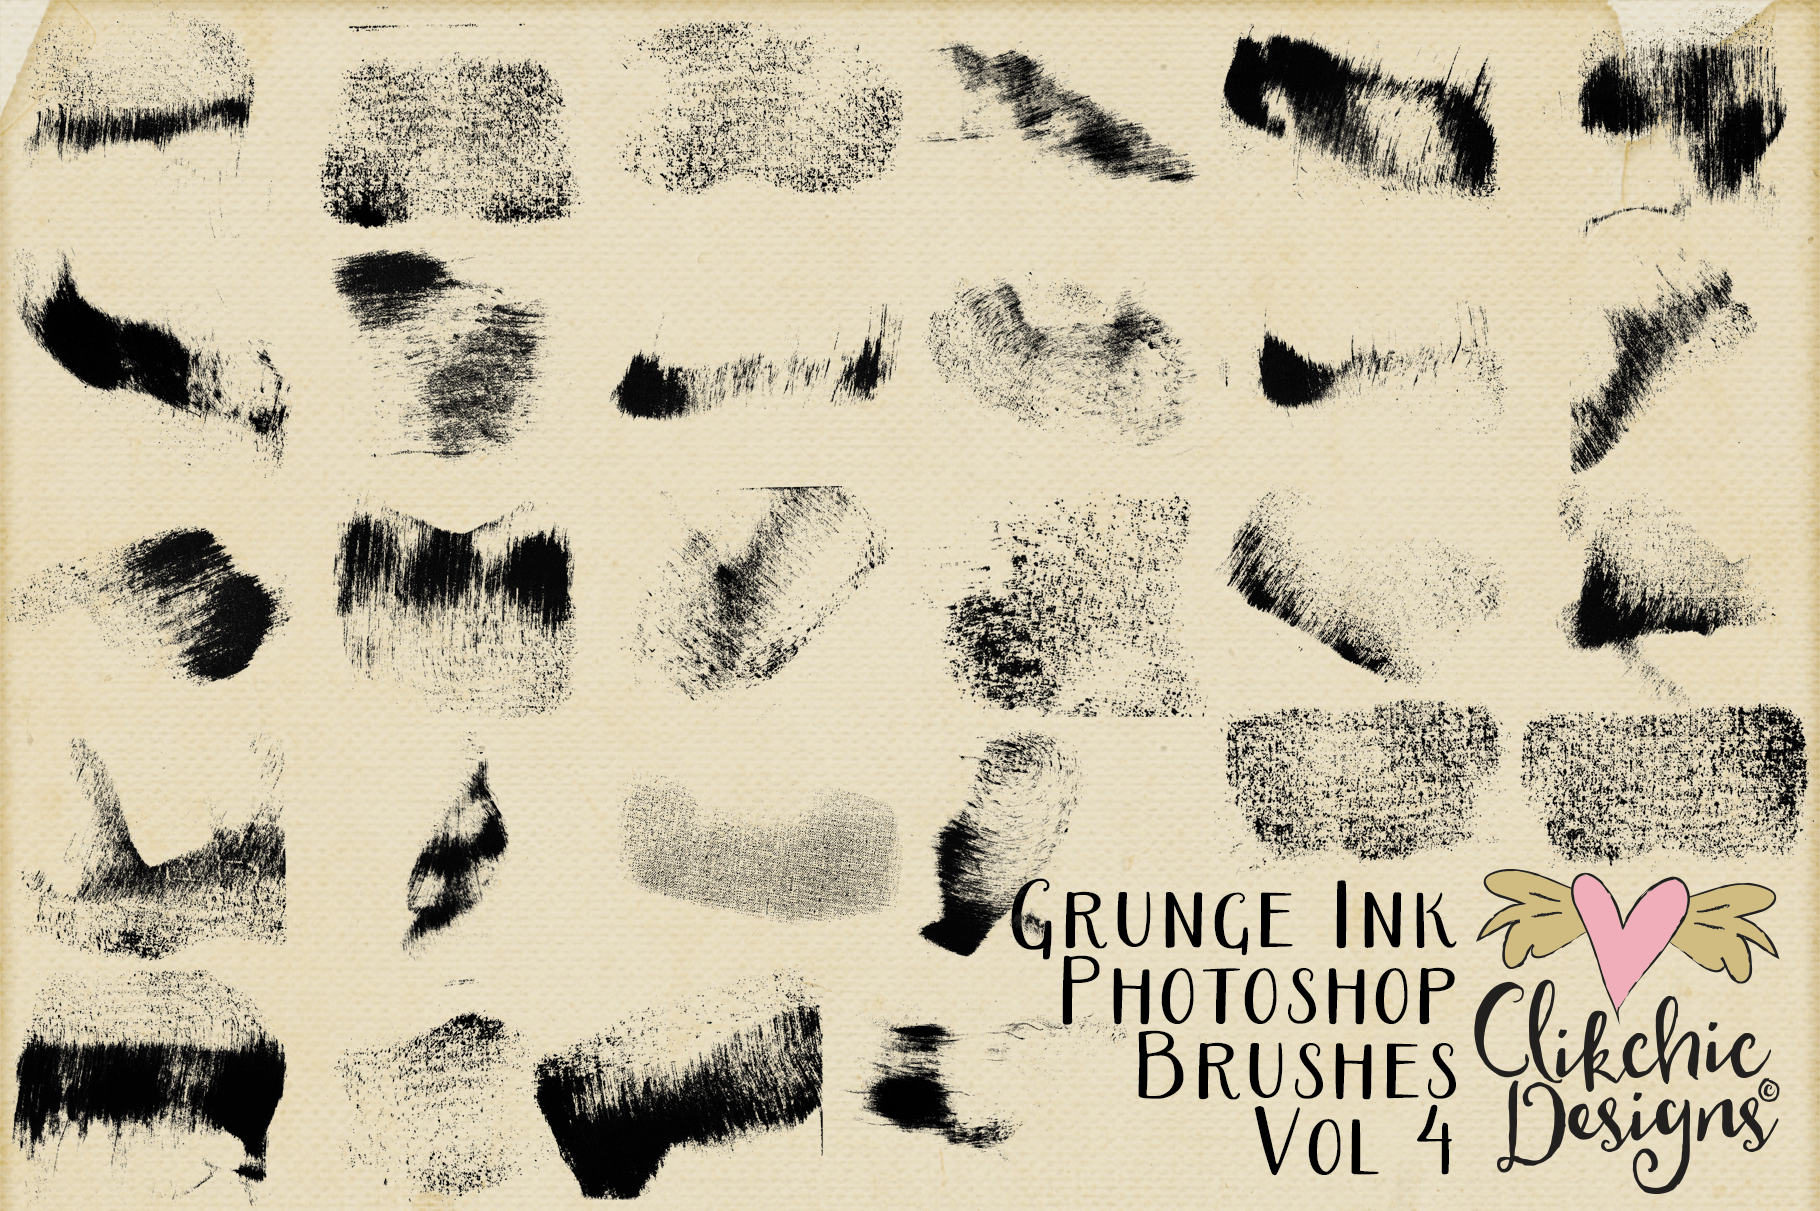 Grunge Ink Smudges Photoshop Brushes by Clikchic Designs